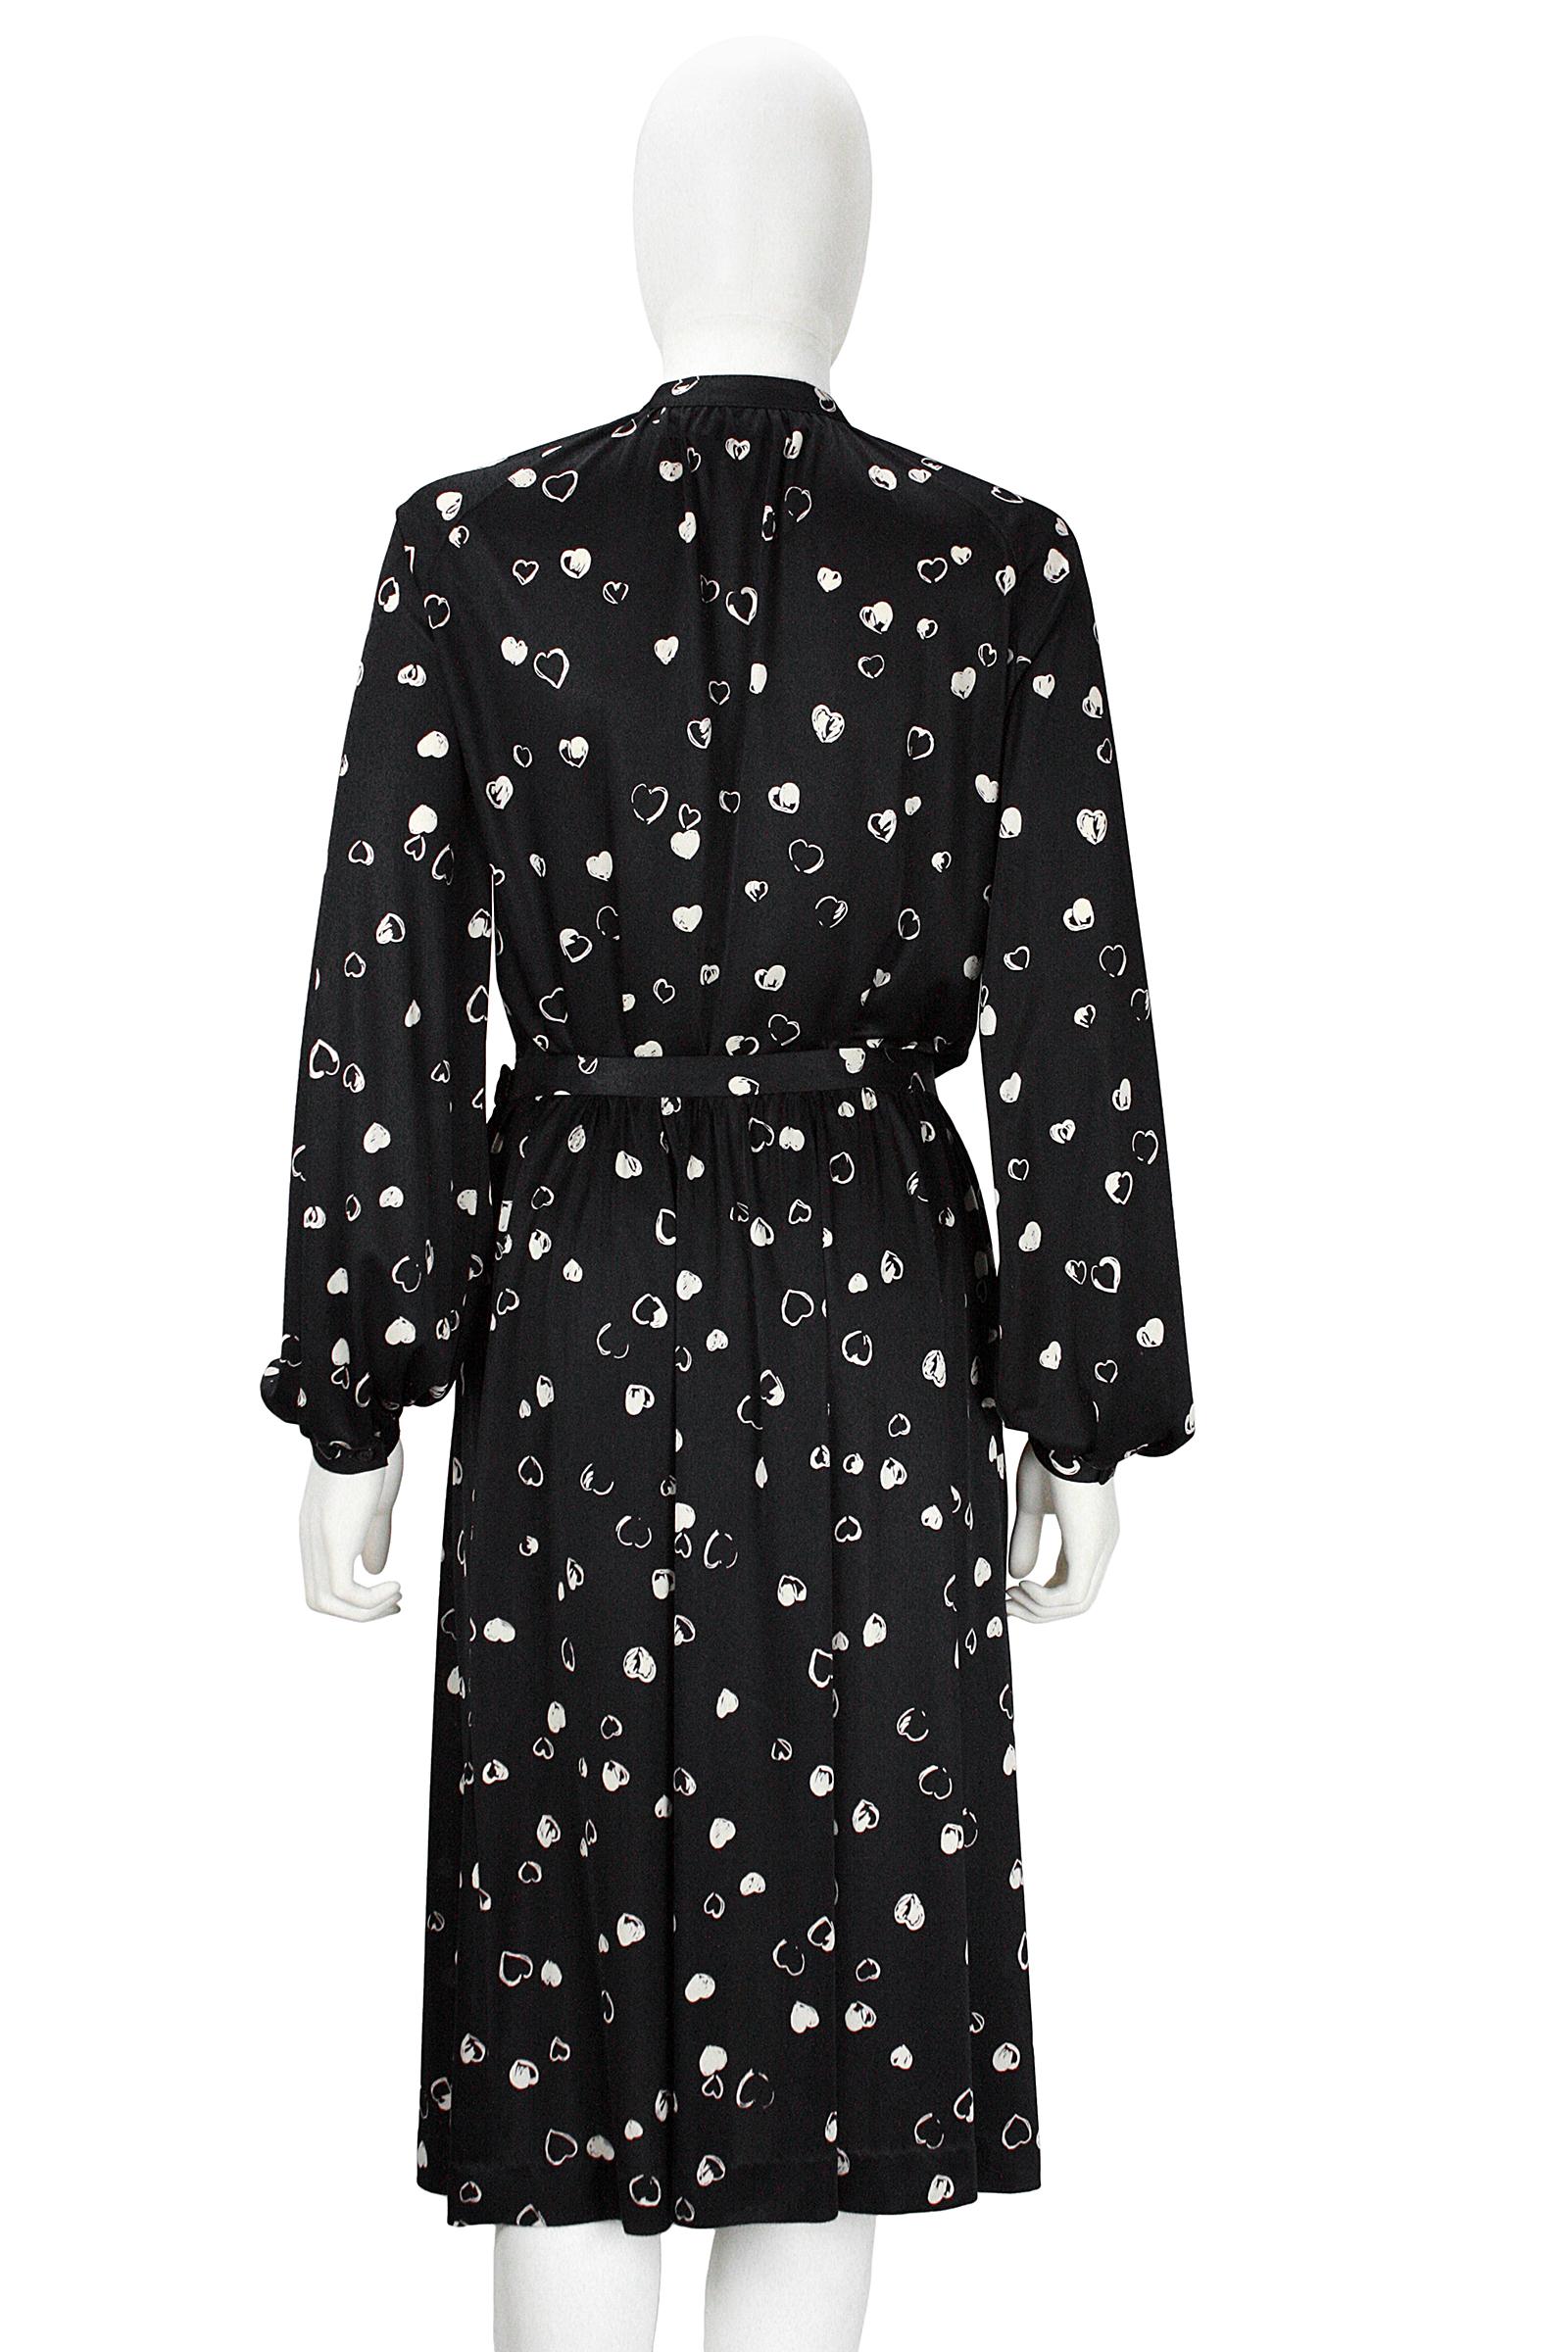 Women's 1970s Halston Black and White Heart Print Button-Down Shirt and Skirt For Sale